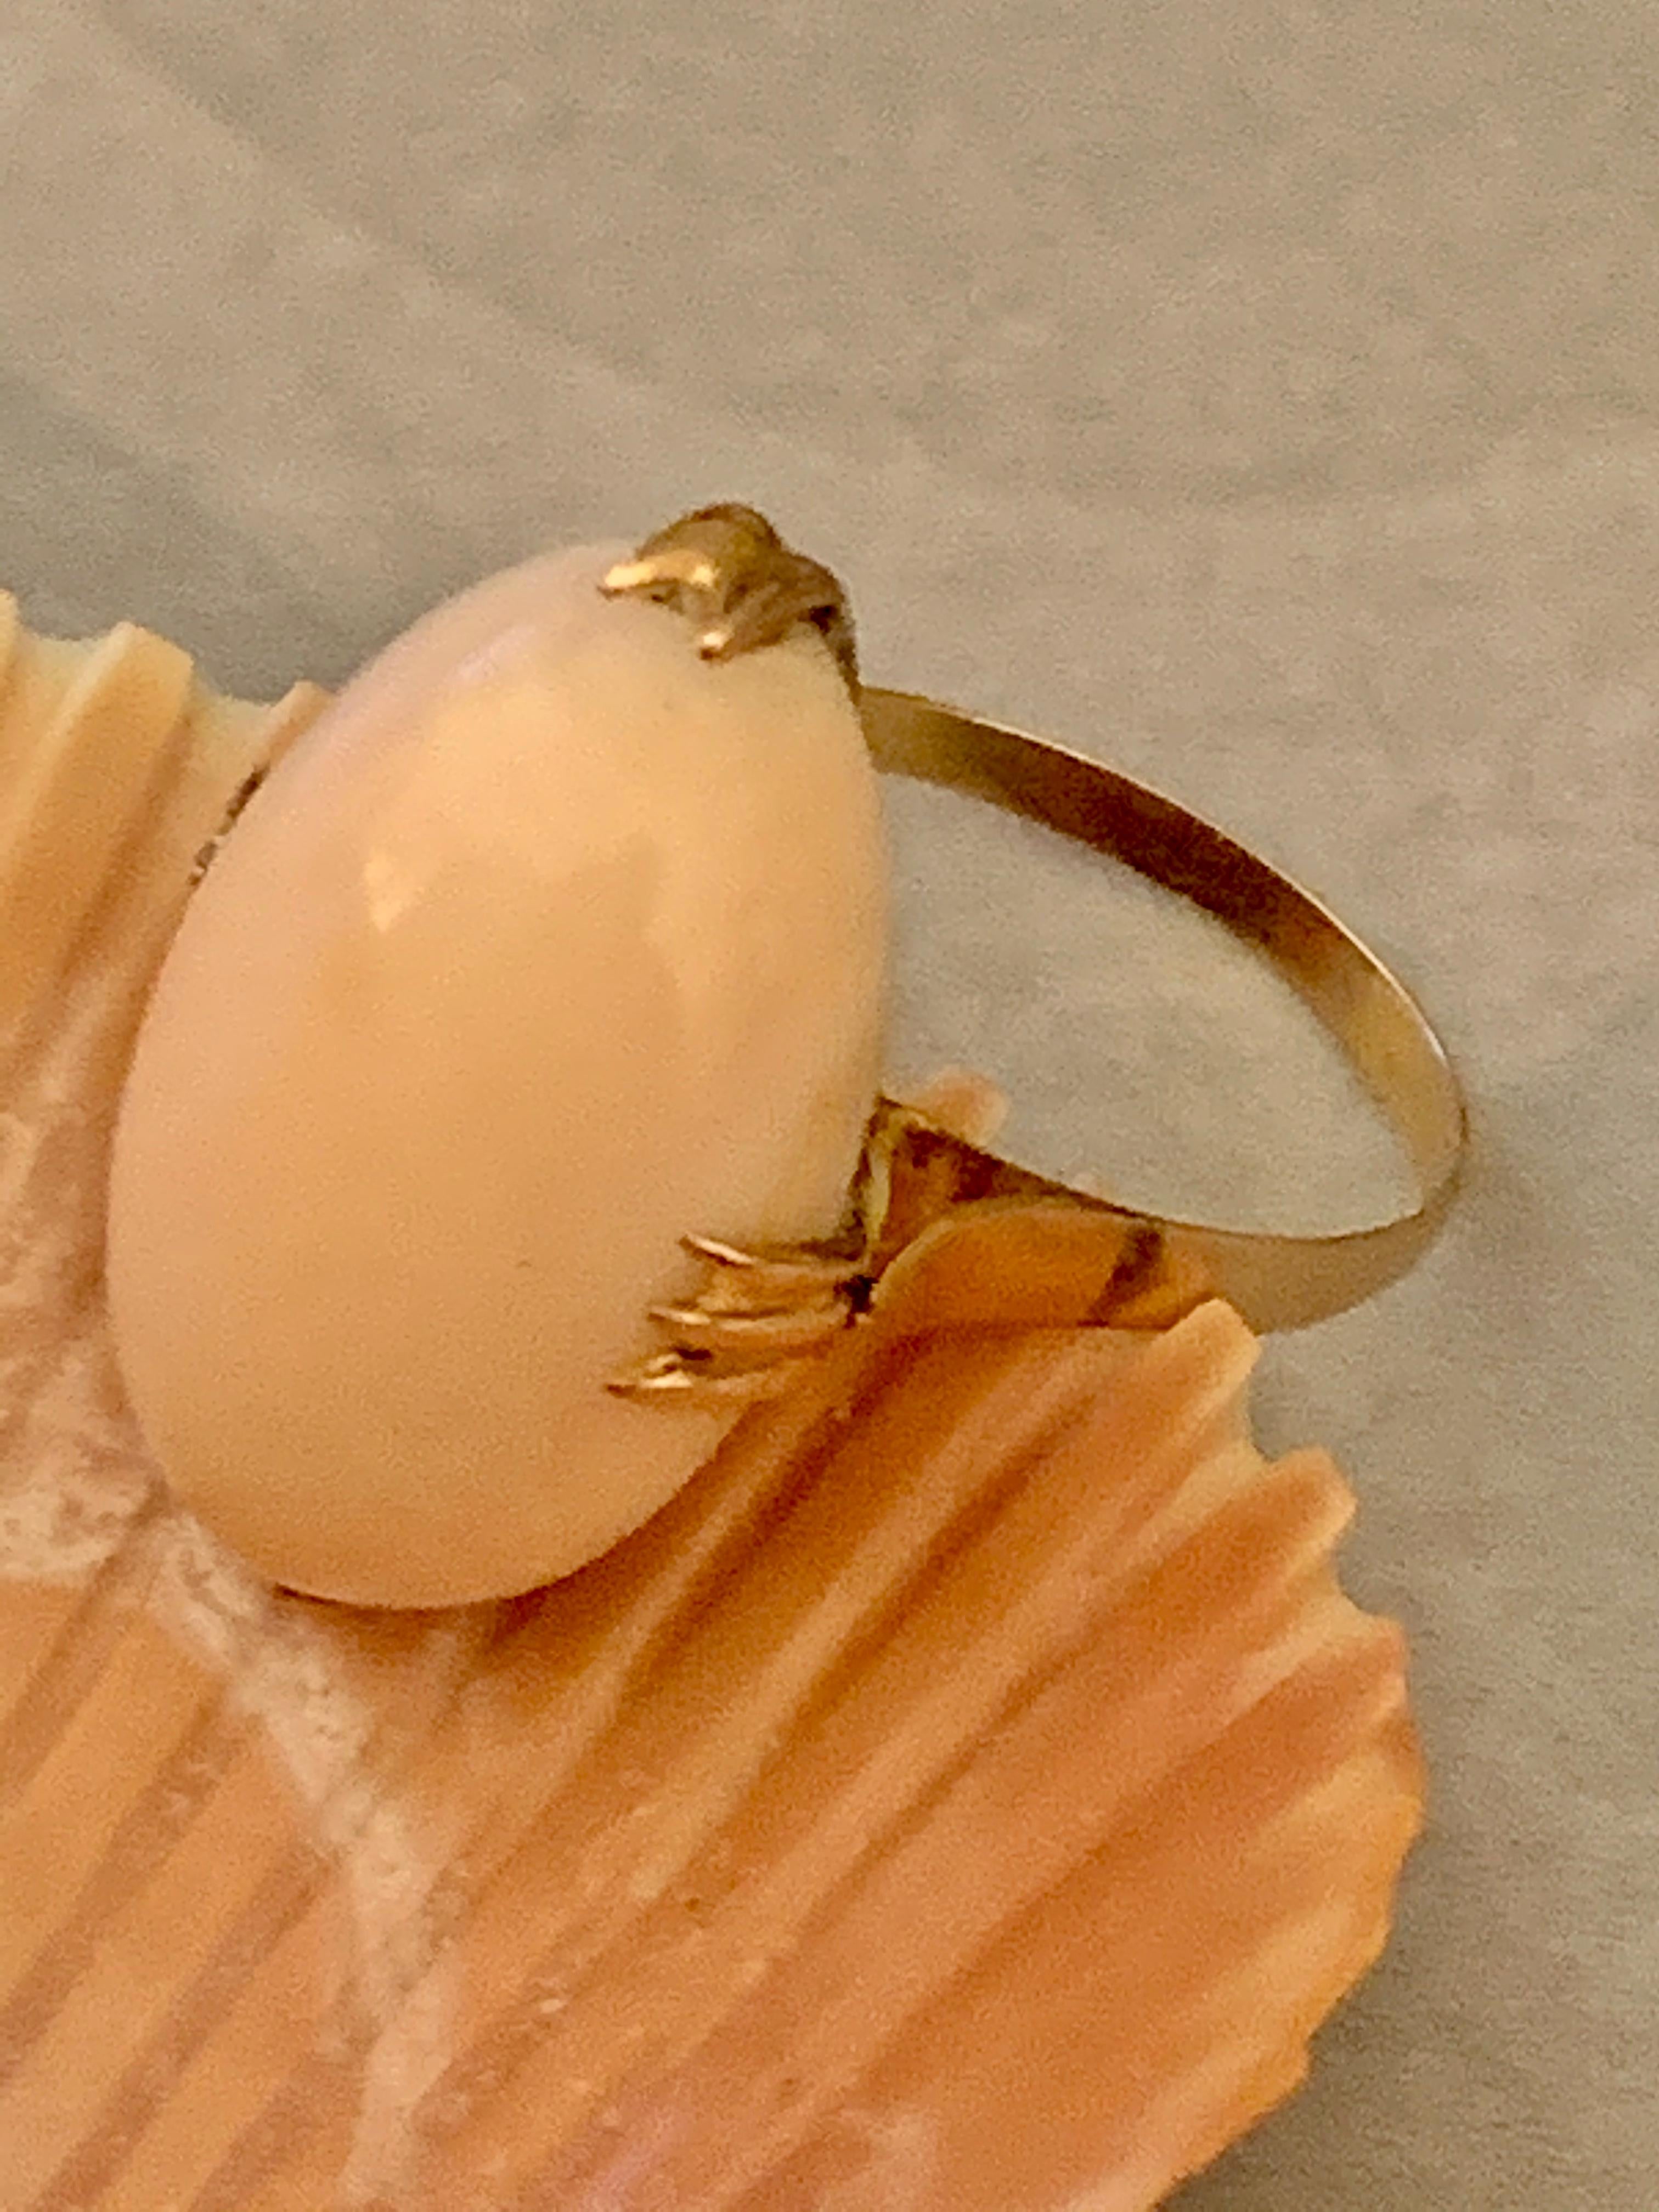 This beautiful ring features a 24 x 15mm oval, cabochon Angel Skin Coral.  It is set in 14 karat yellow Gold.

Size: 8
Weight: 7.3 grams